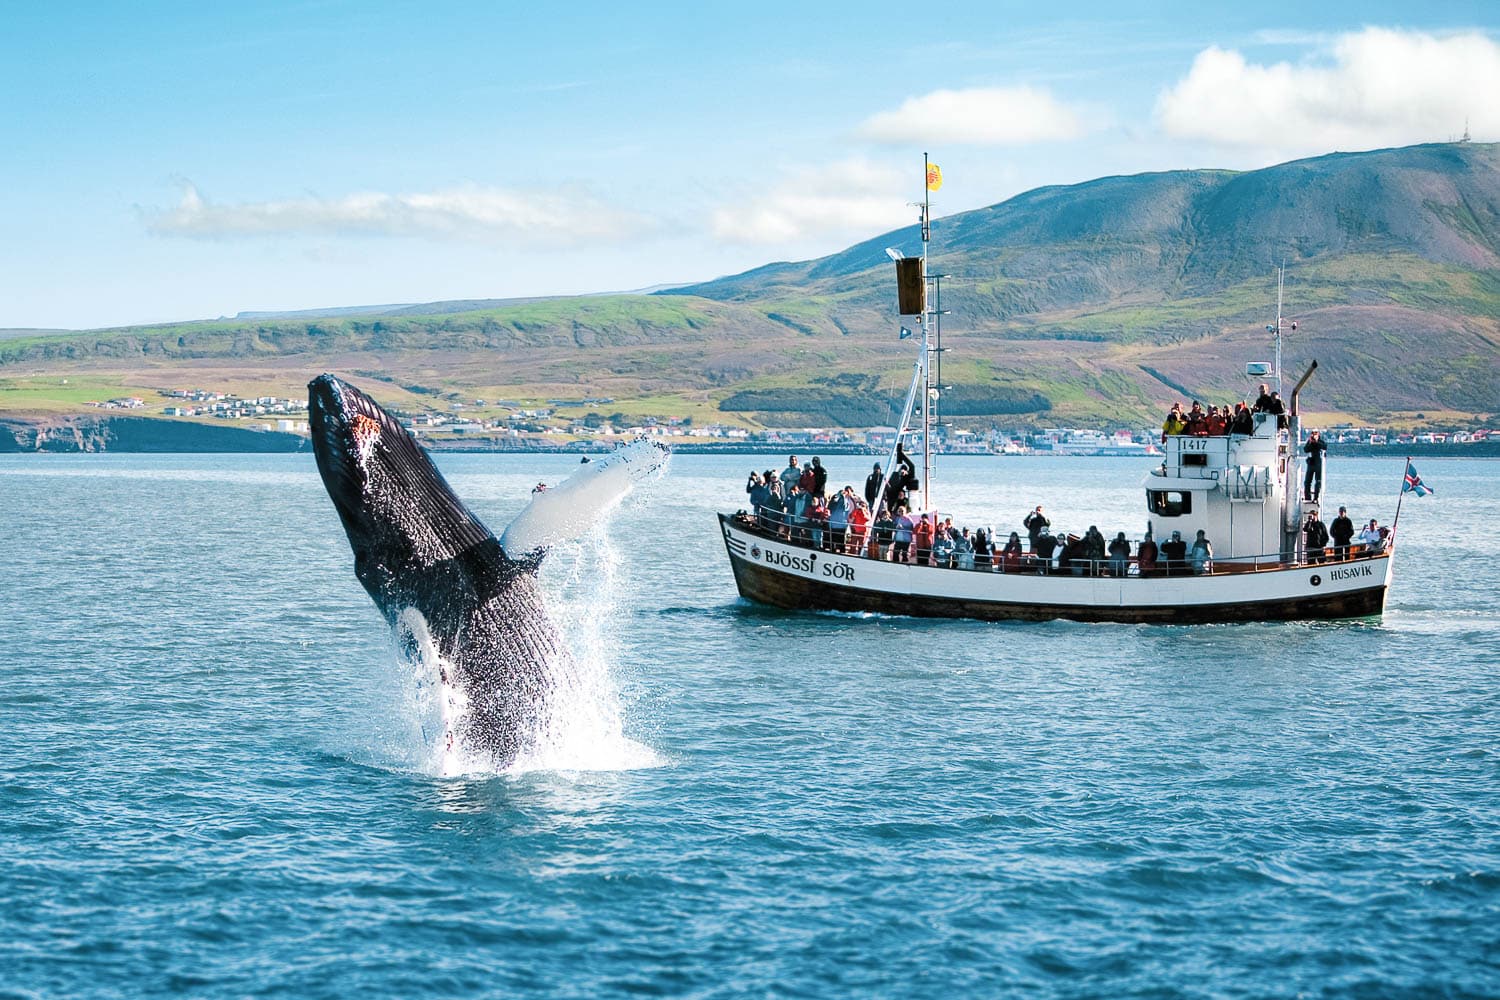 Experience the Original Húsavík Whale Watching tour, renowned for making Húsavík the Whale Watching Capital of Iceland.